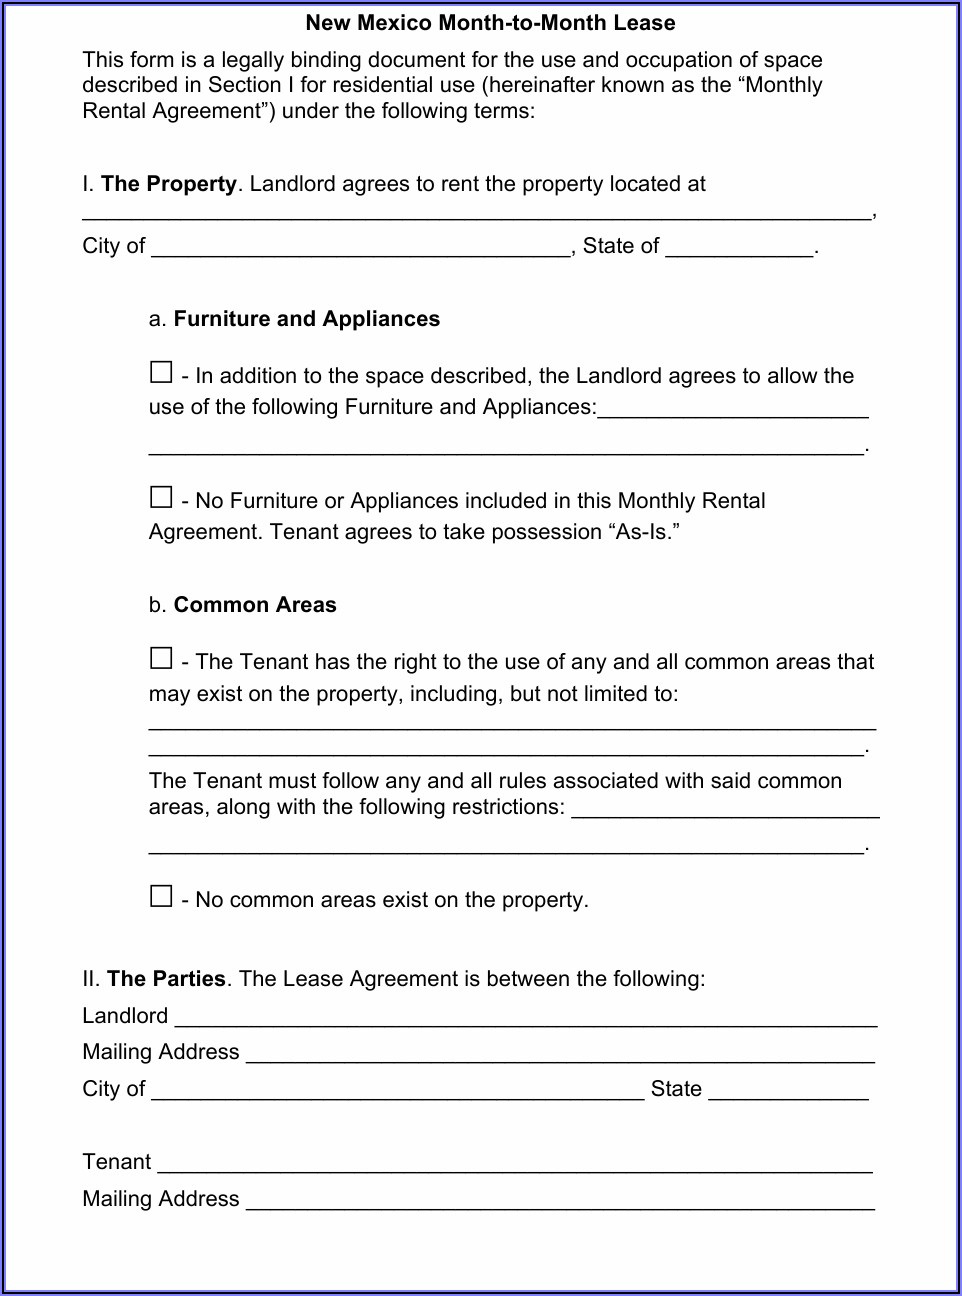 New Mexico Month To Month Lease Agreement Pdf